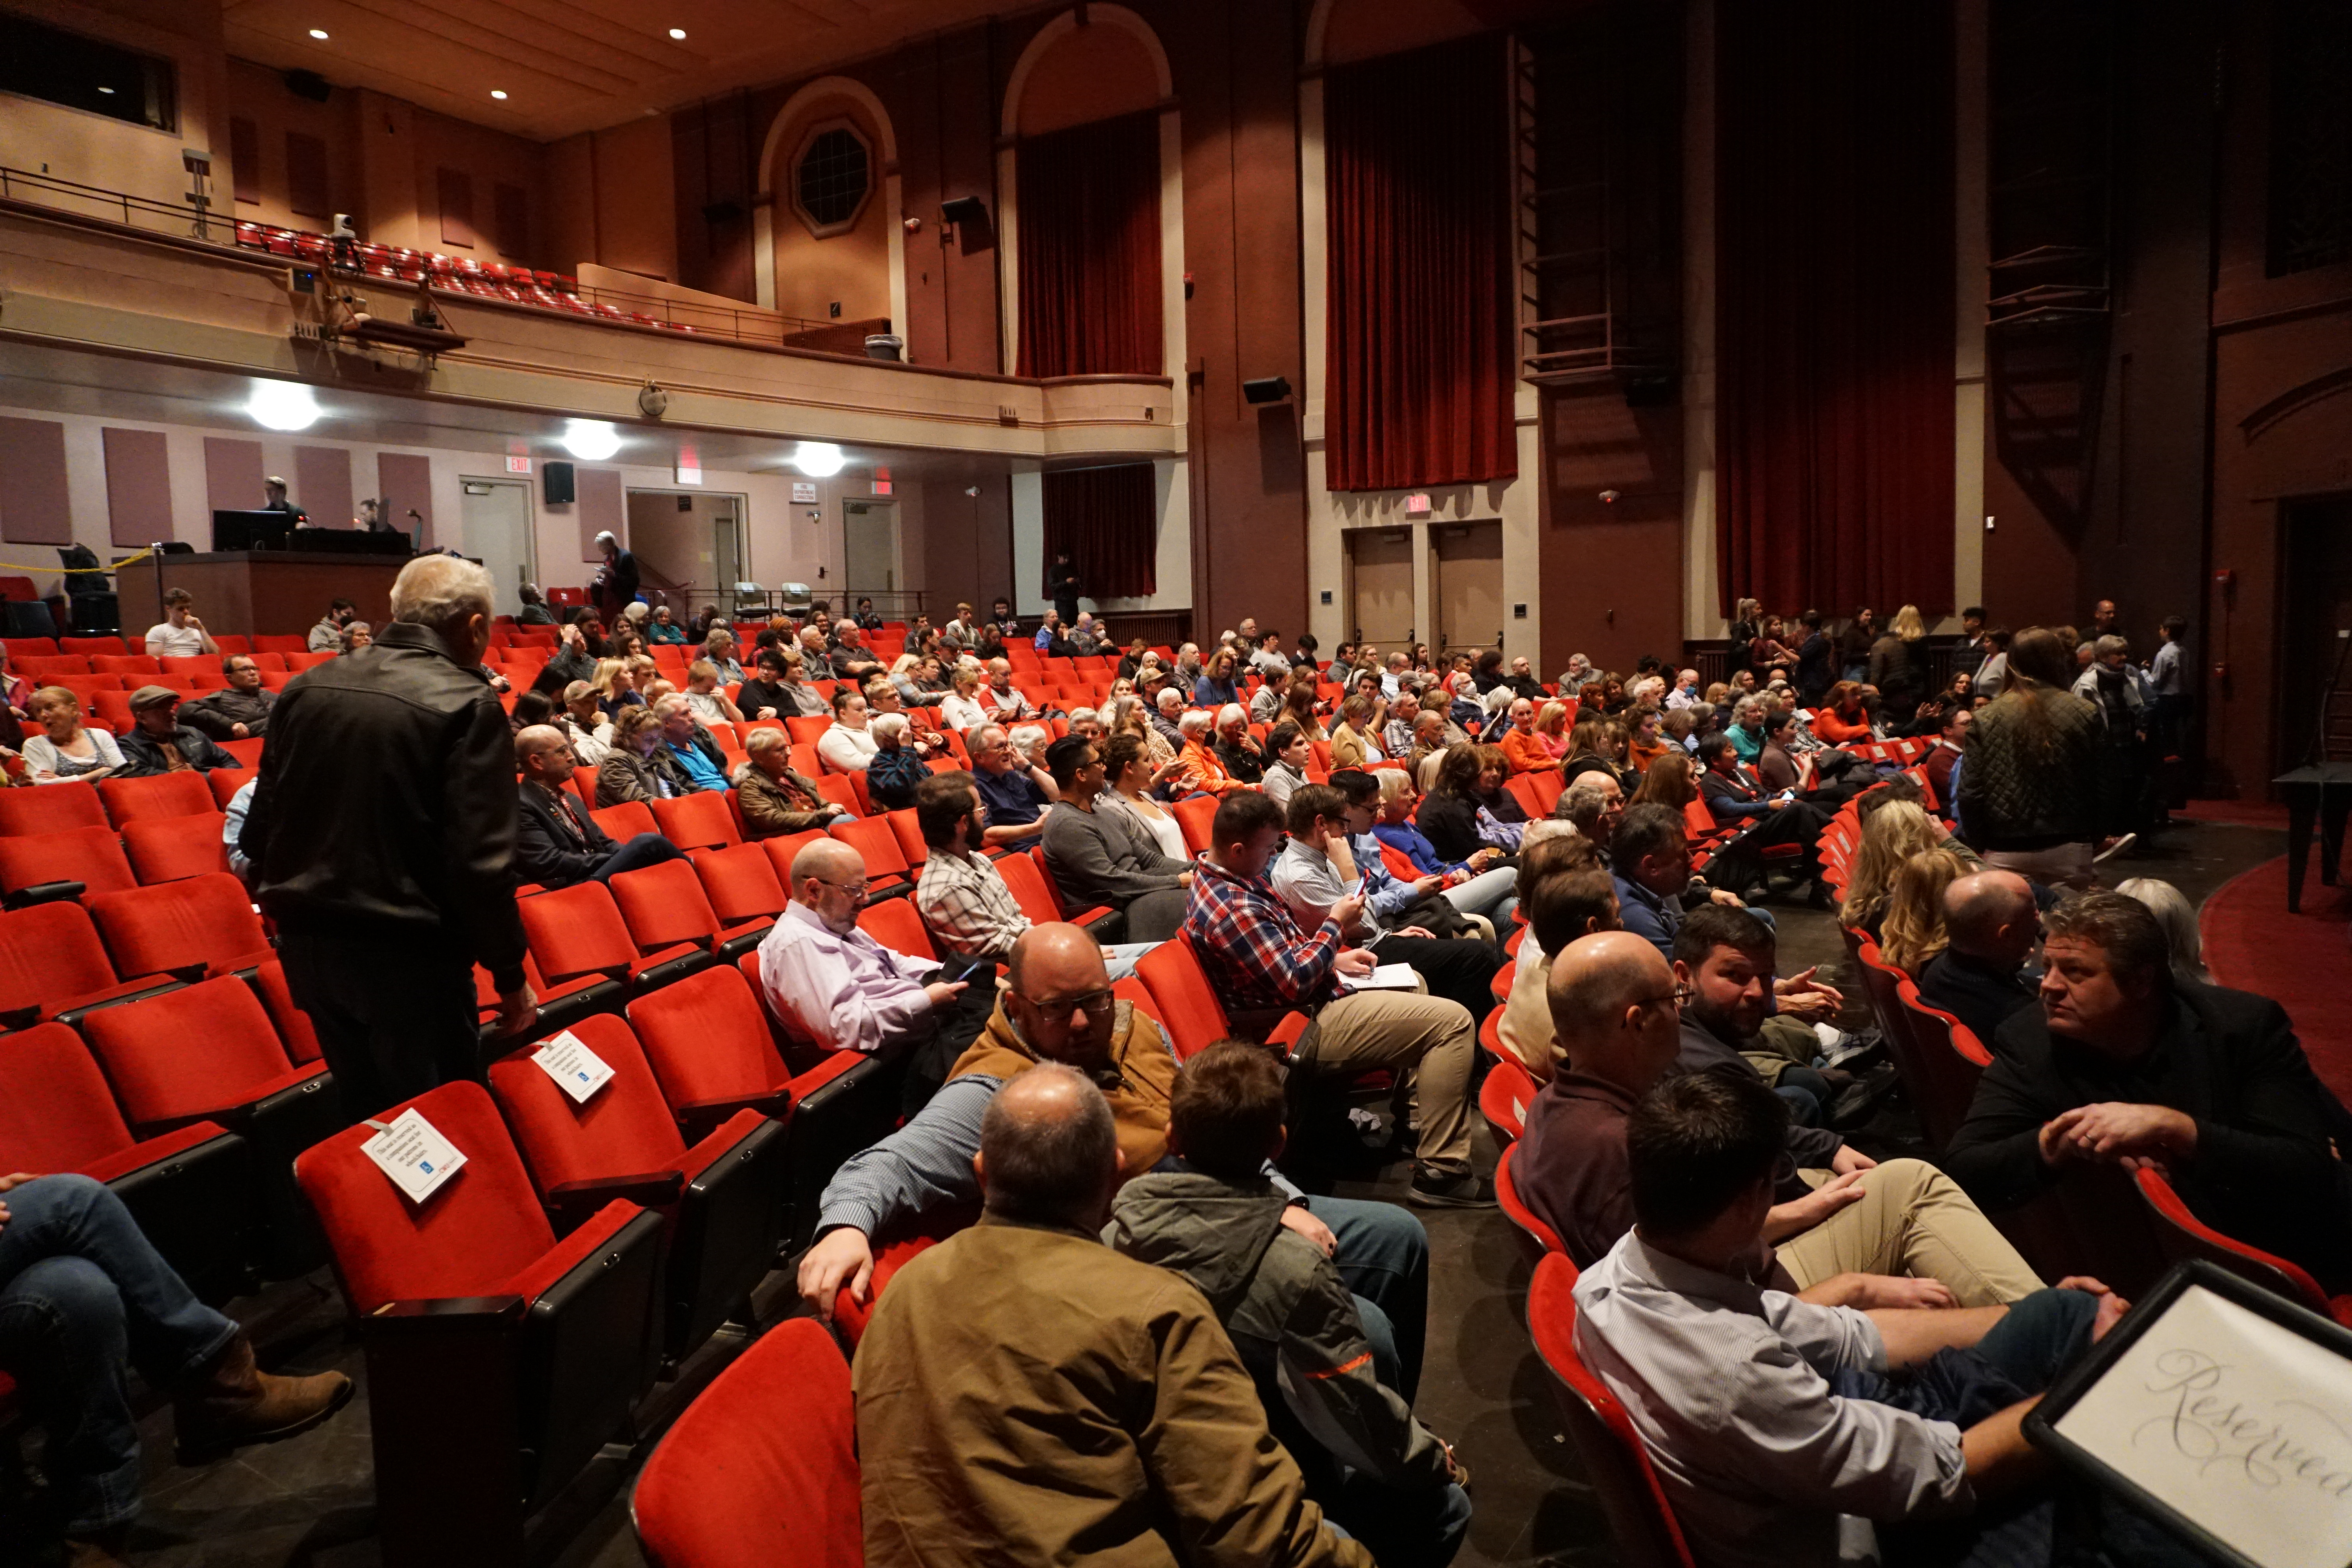 A crowd shot of the 8th Congressional District debate at McConnell Auditorium at Central Washington University in Ellensburg.